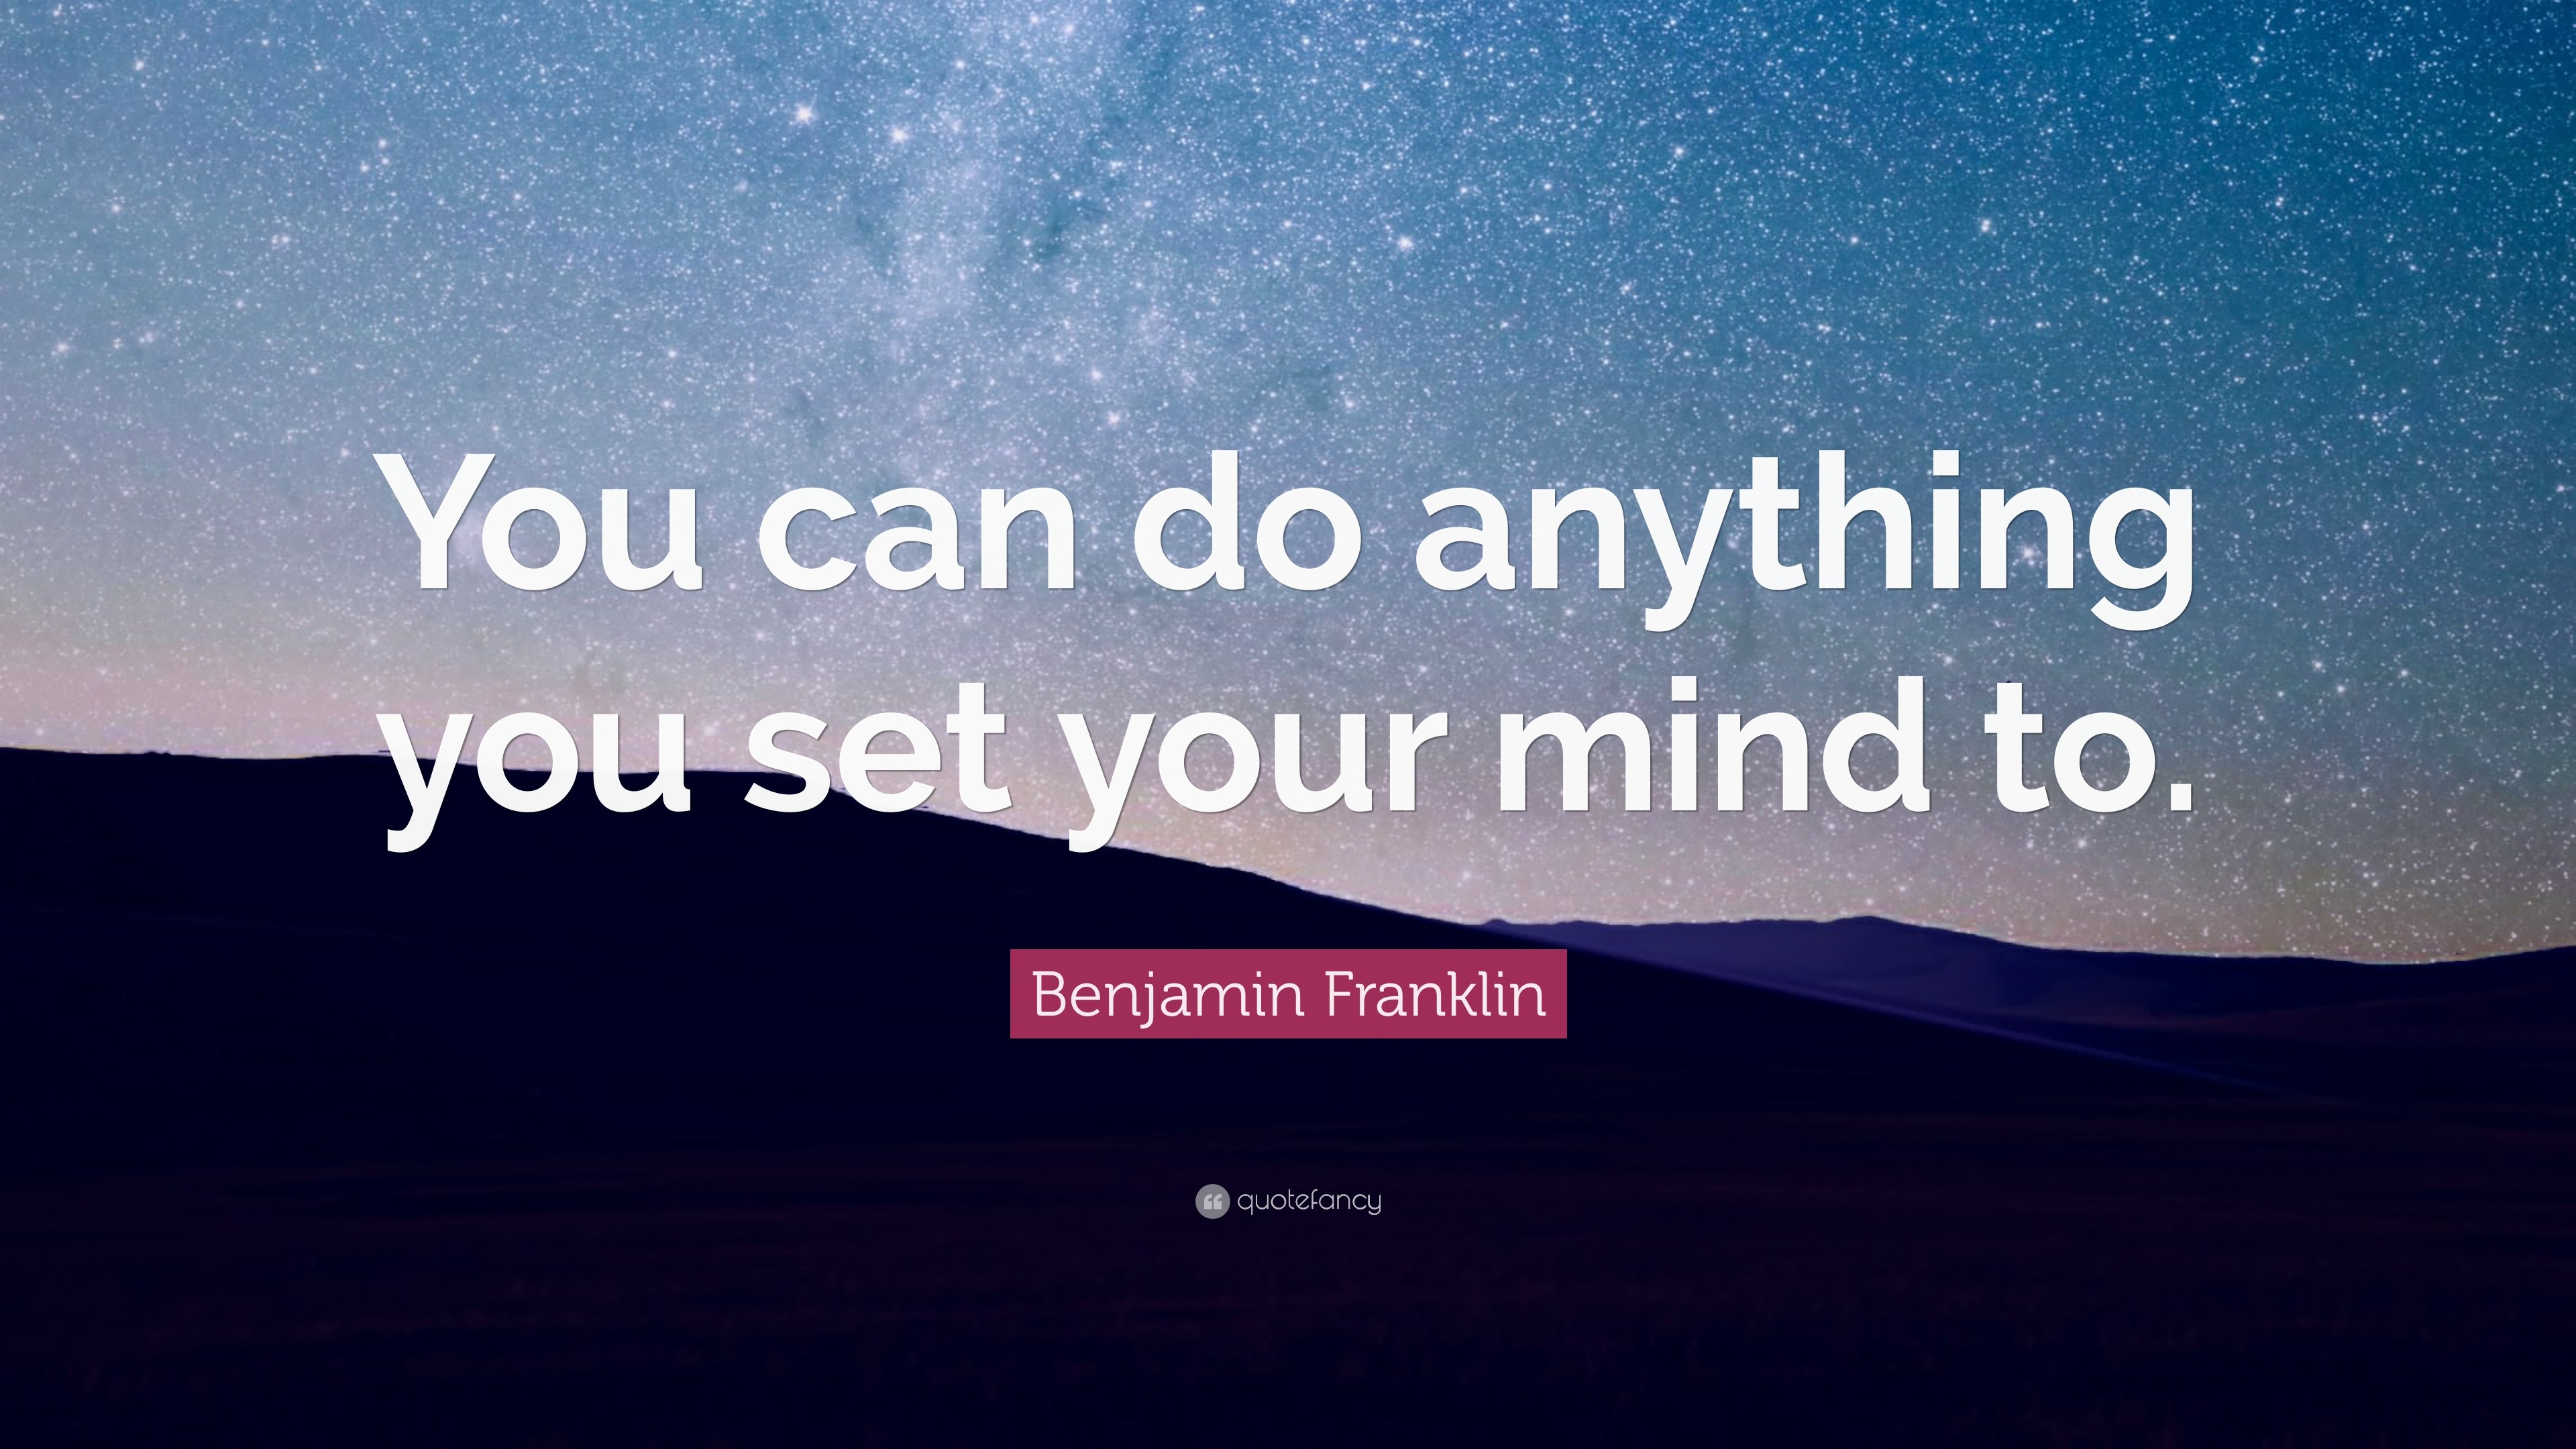 Benjamin Franklin Quote: “You can do anything you set your mind to.”